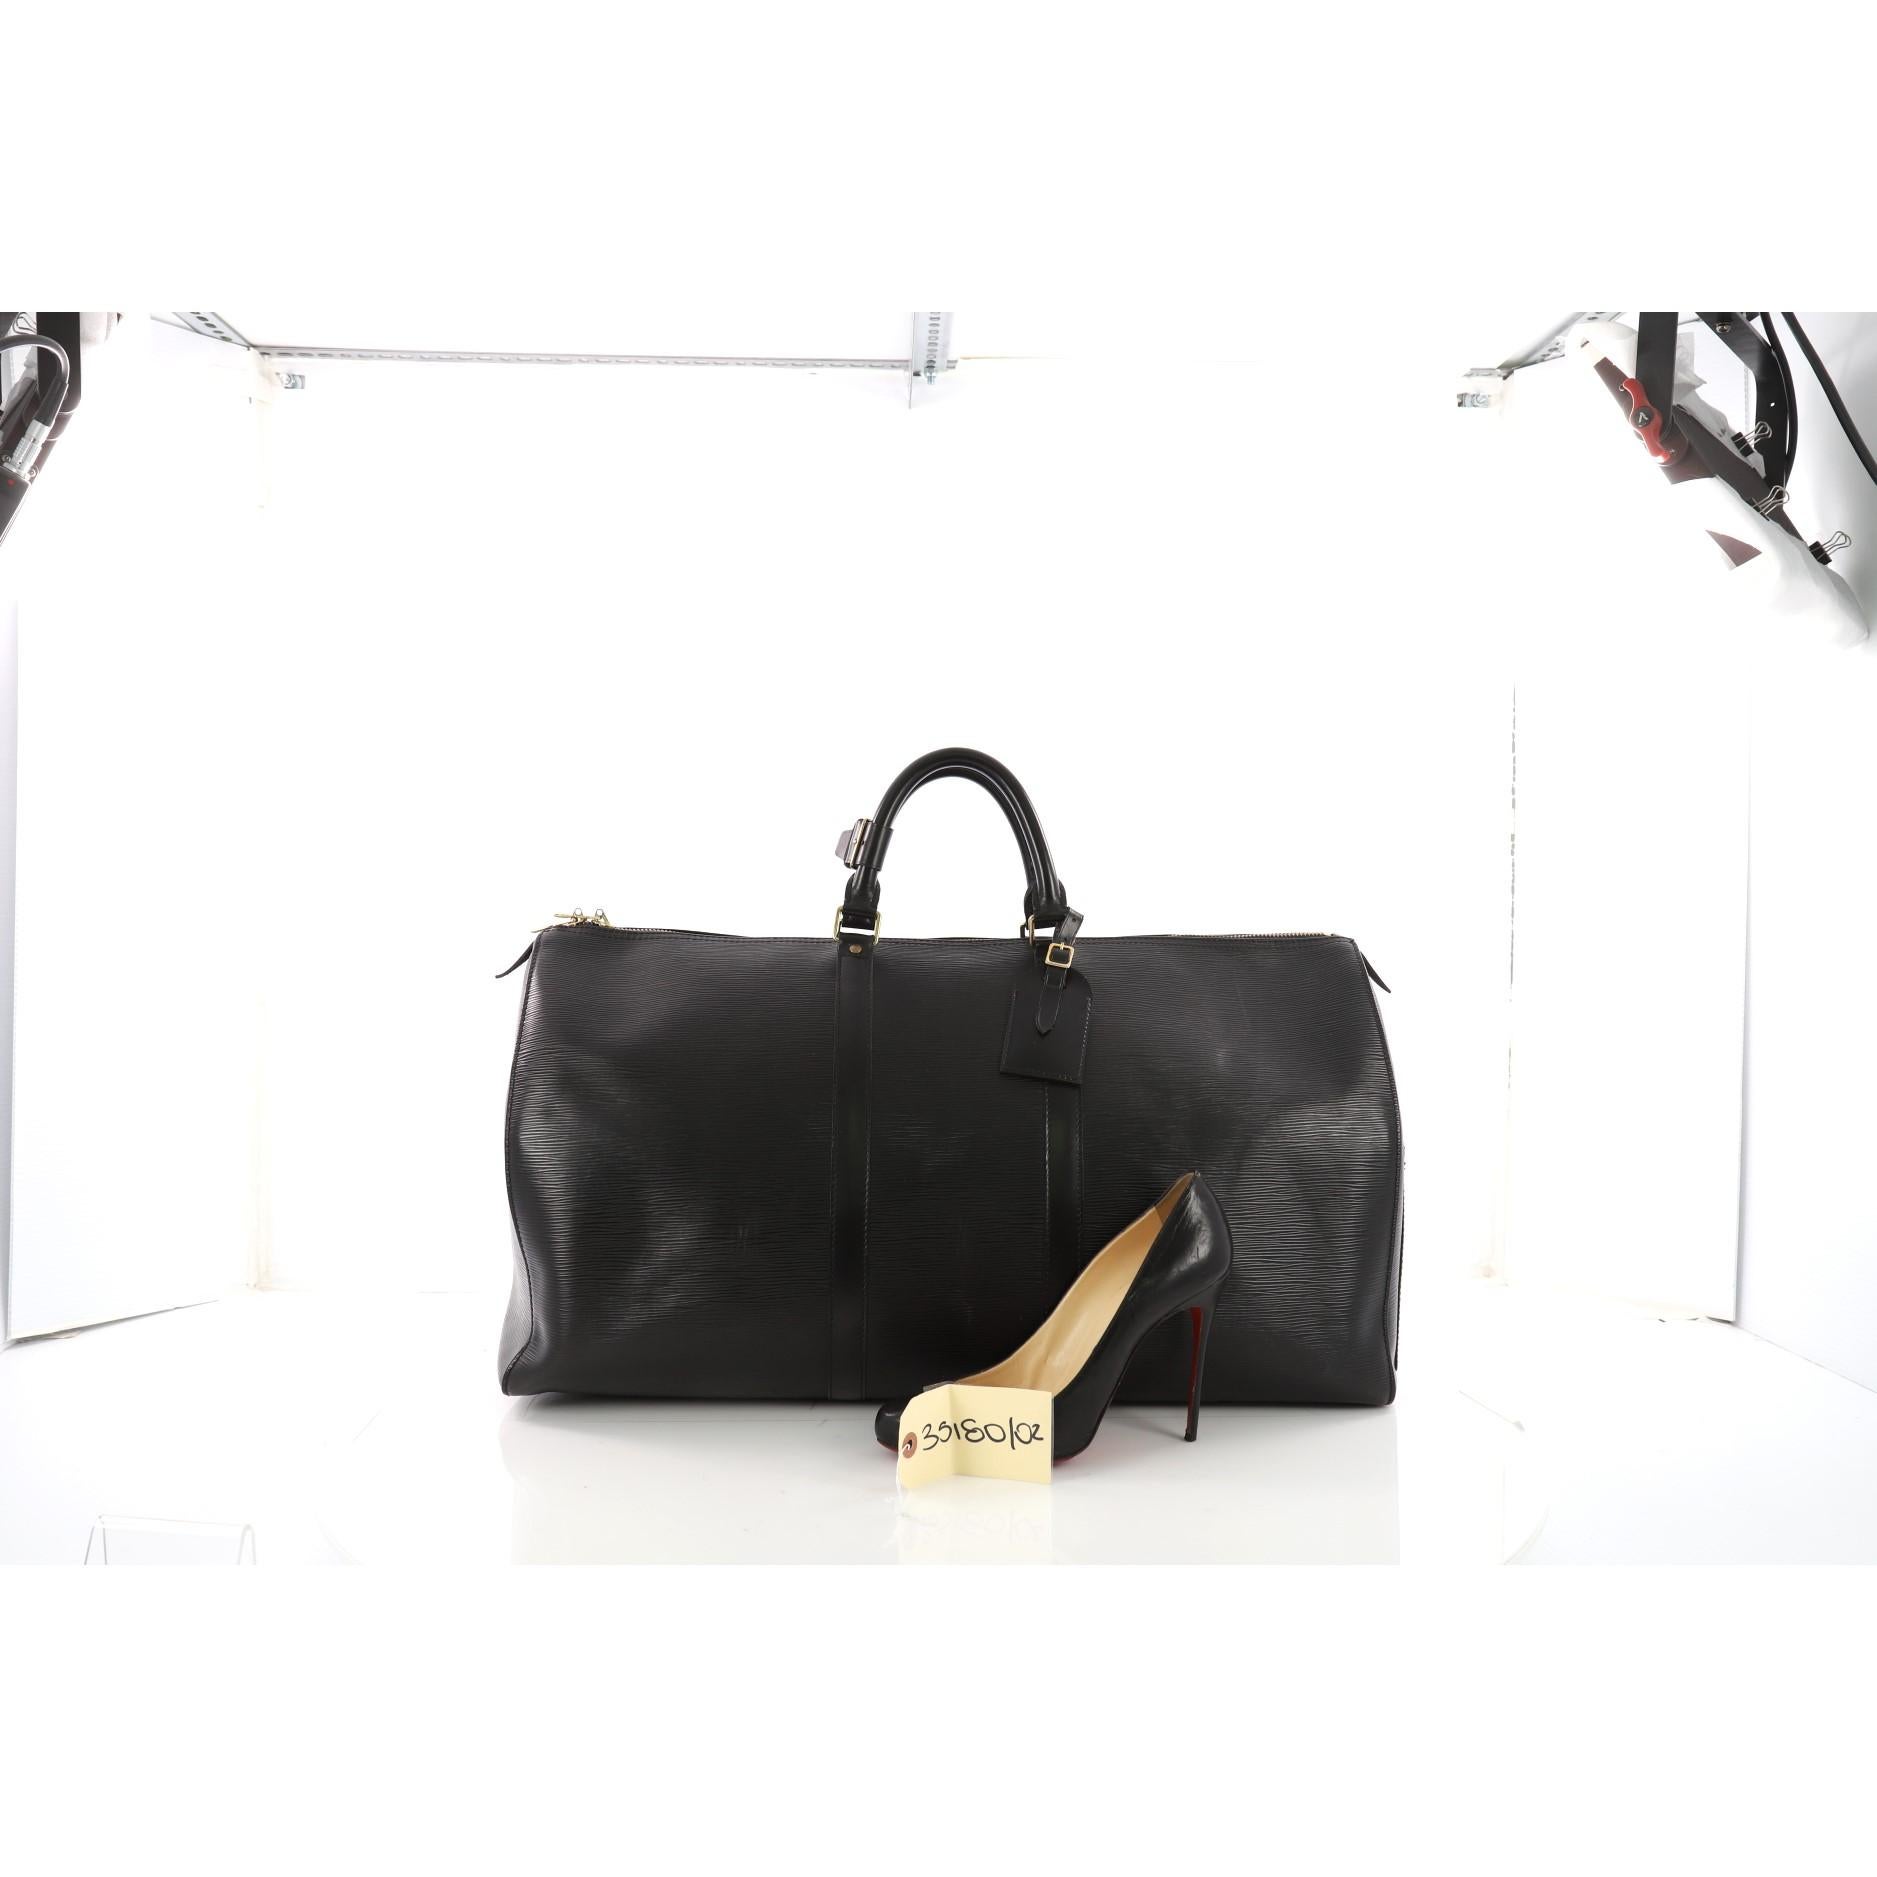 This authentic Louis Vuitton Keepall Bag Epi Leather 60 is the brand's timeless travel bag. Constructed from black epi leather, this iconic Keepall is accented with dual-rolled leather handles, subtle LV logo, exterior slip pocket and gold-tone